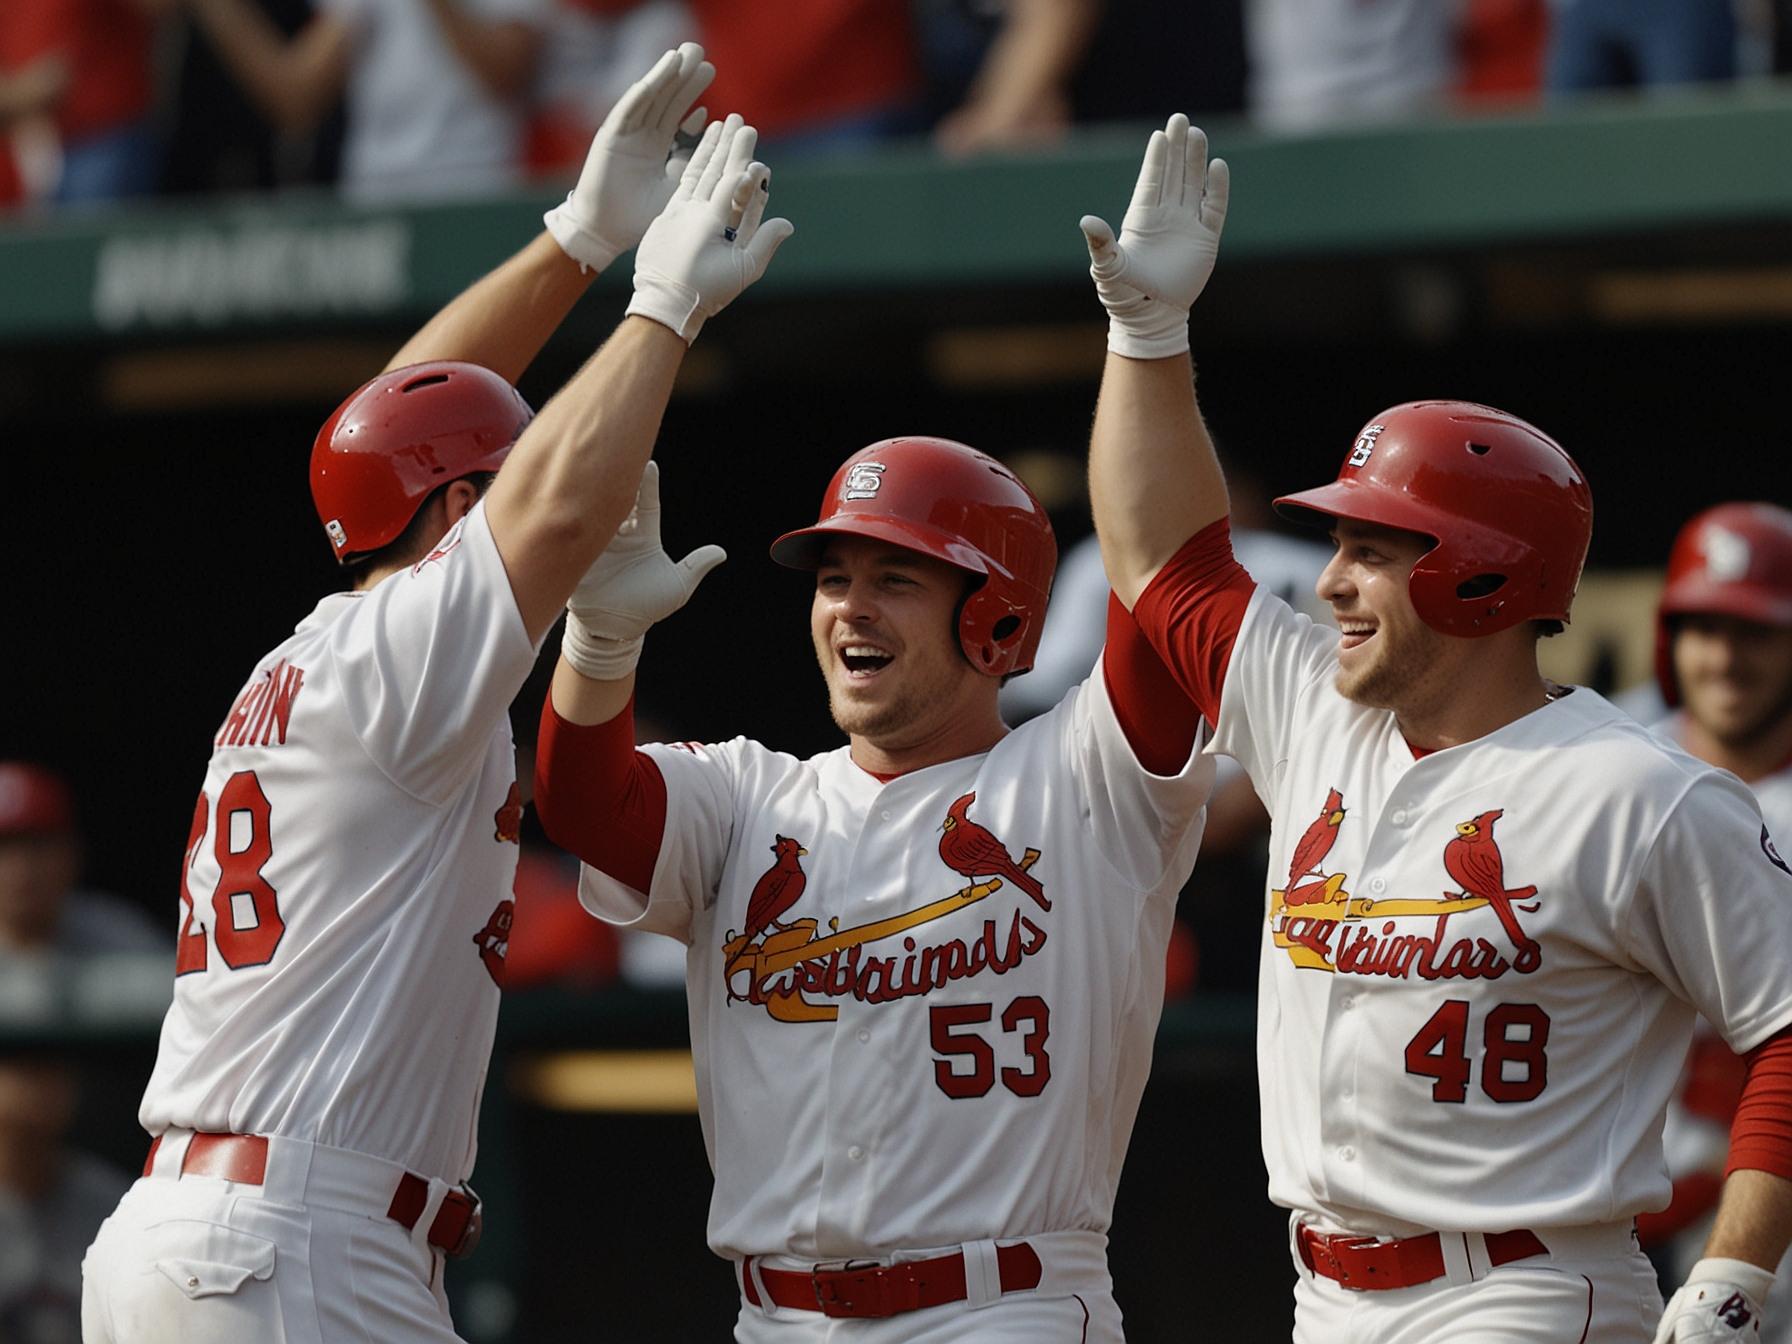 Masyn Winn celebrates with teammates after hitting a two-run homer in the 12th inning, propelling the St. Louis Cardinals to a narrow 7-6 victory over the Miami Marlins.